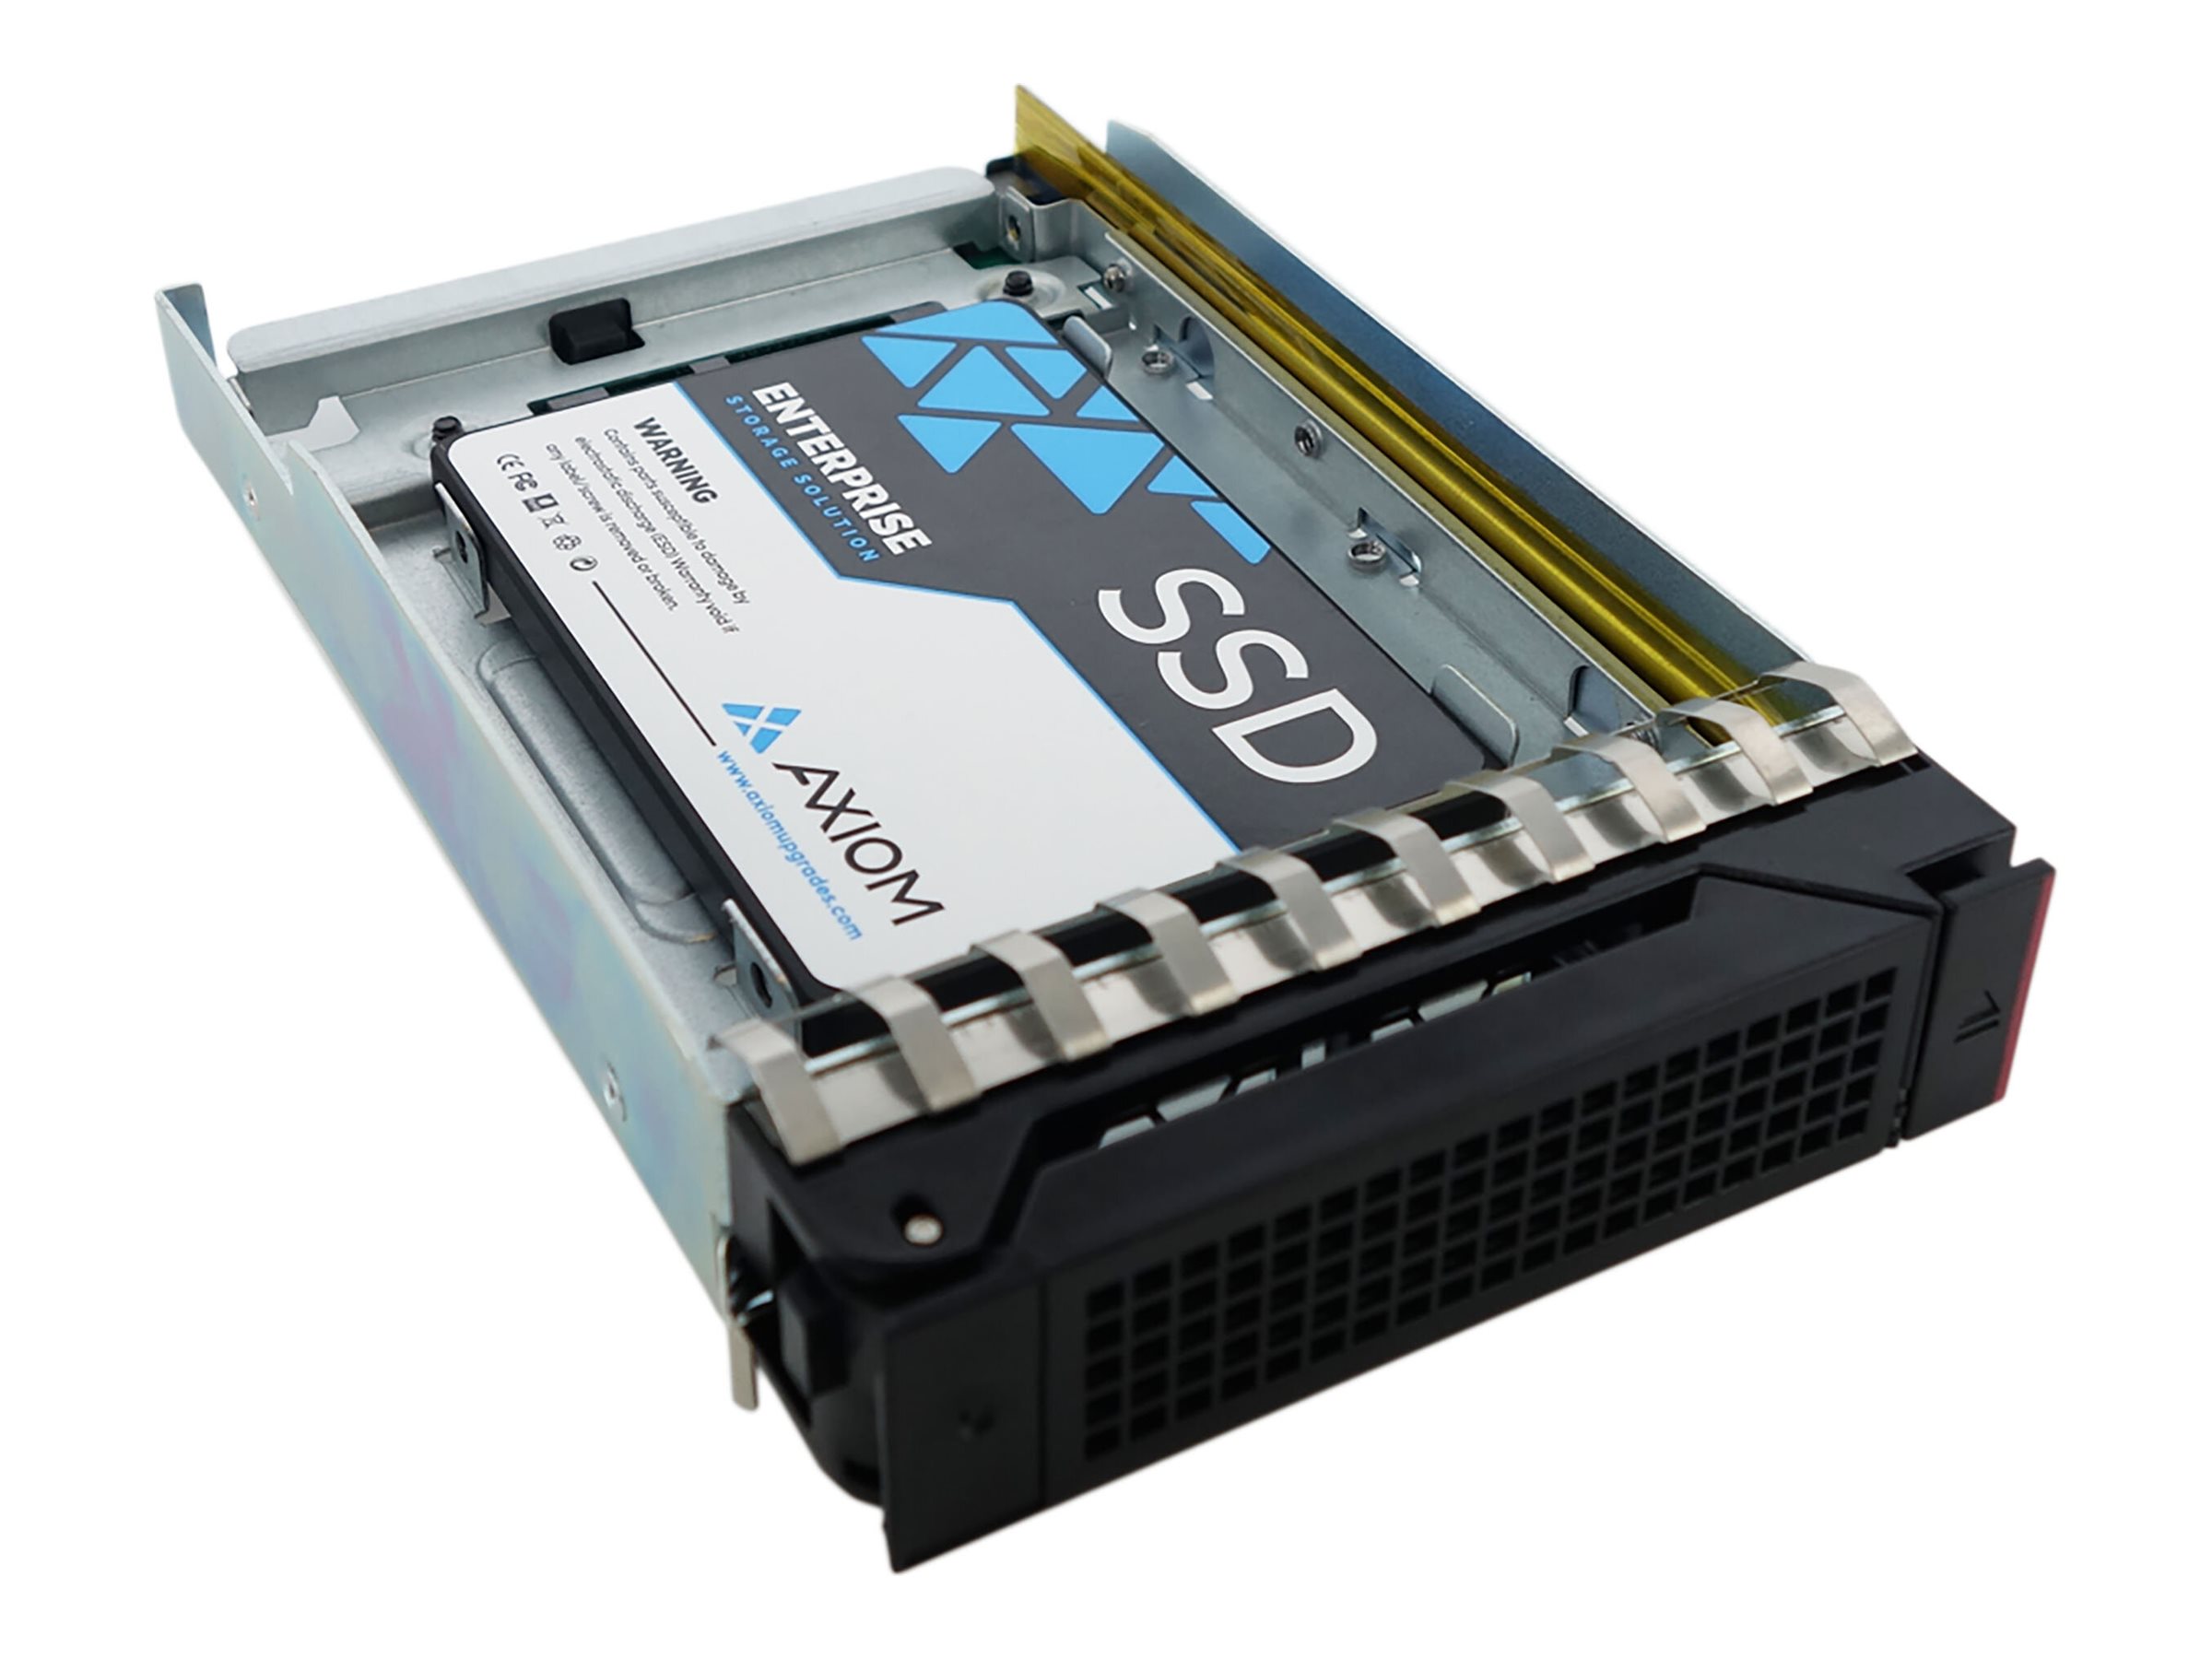 Axiom Enterprise Professional EP400 - Solid state drive